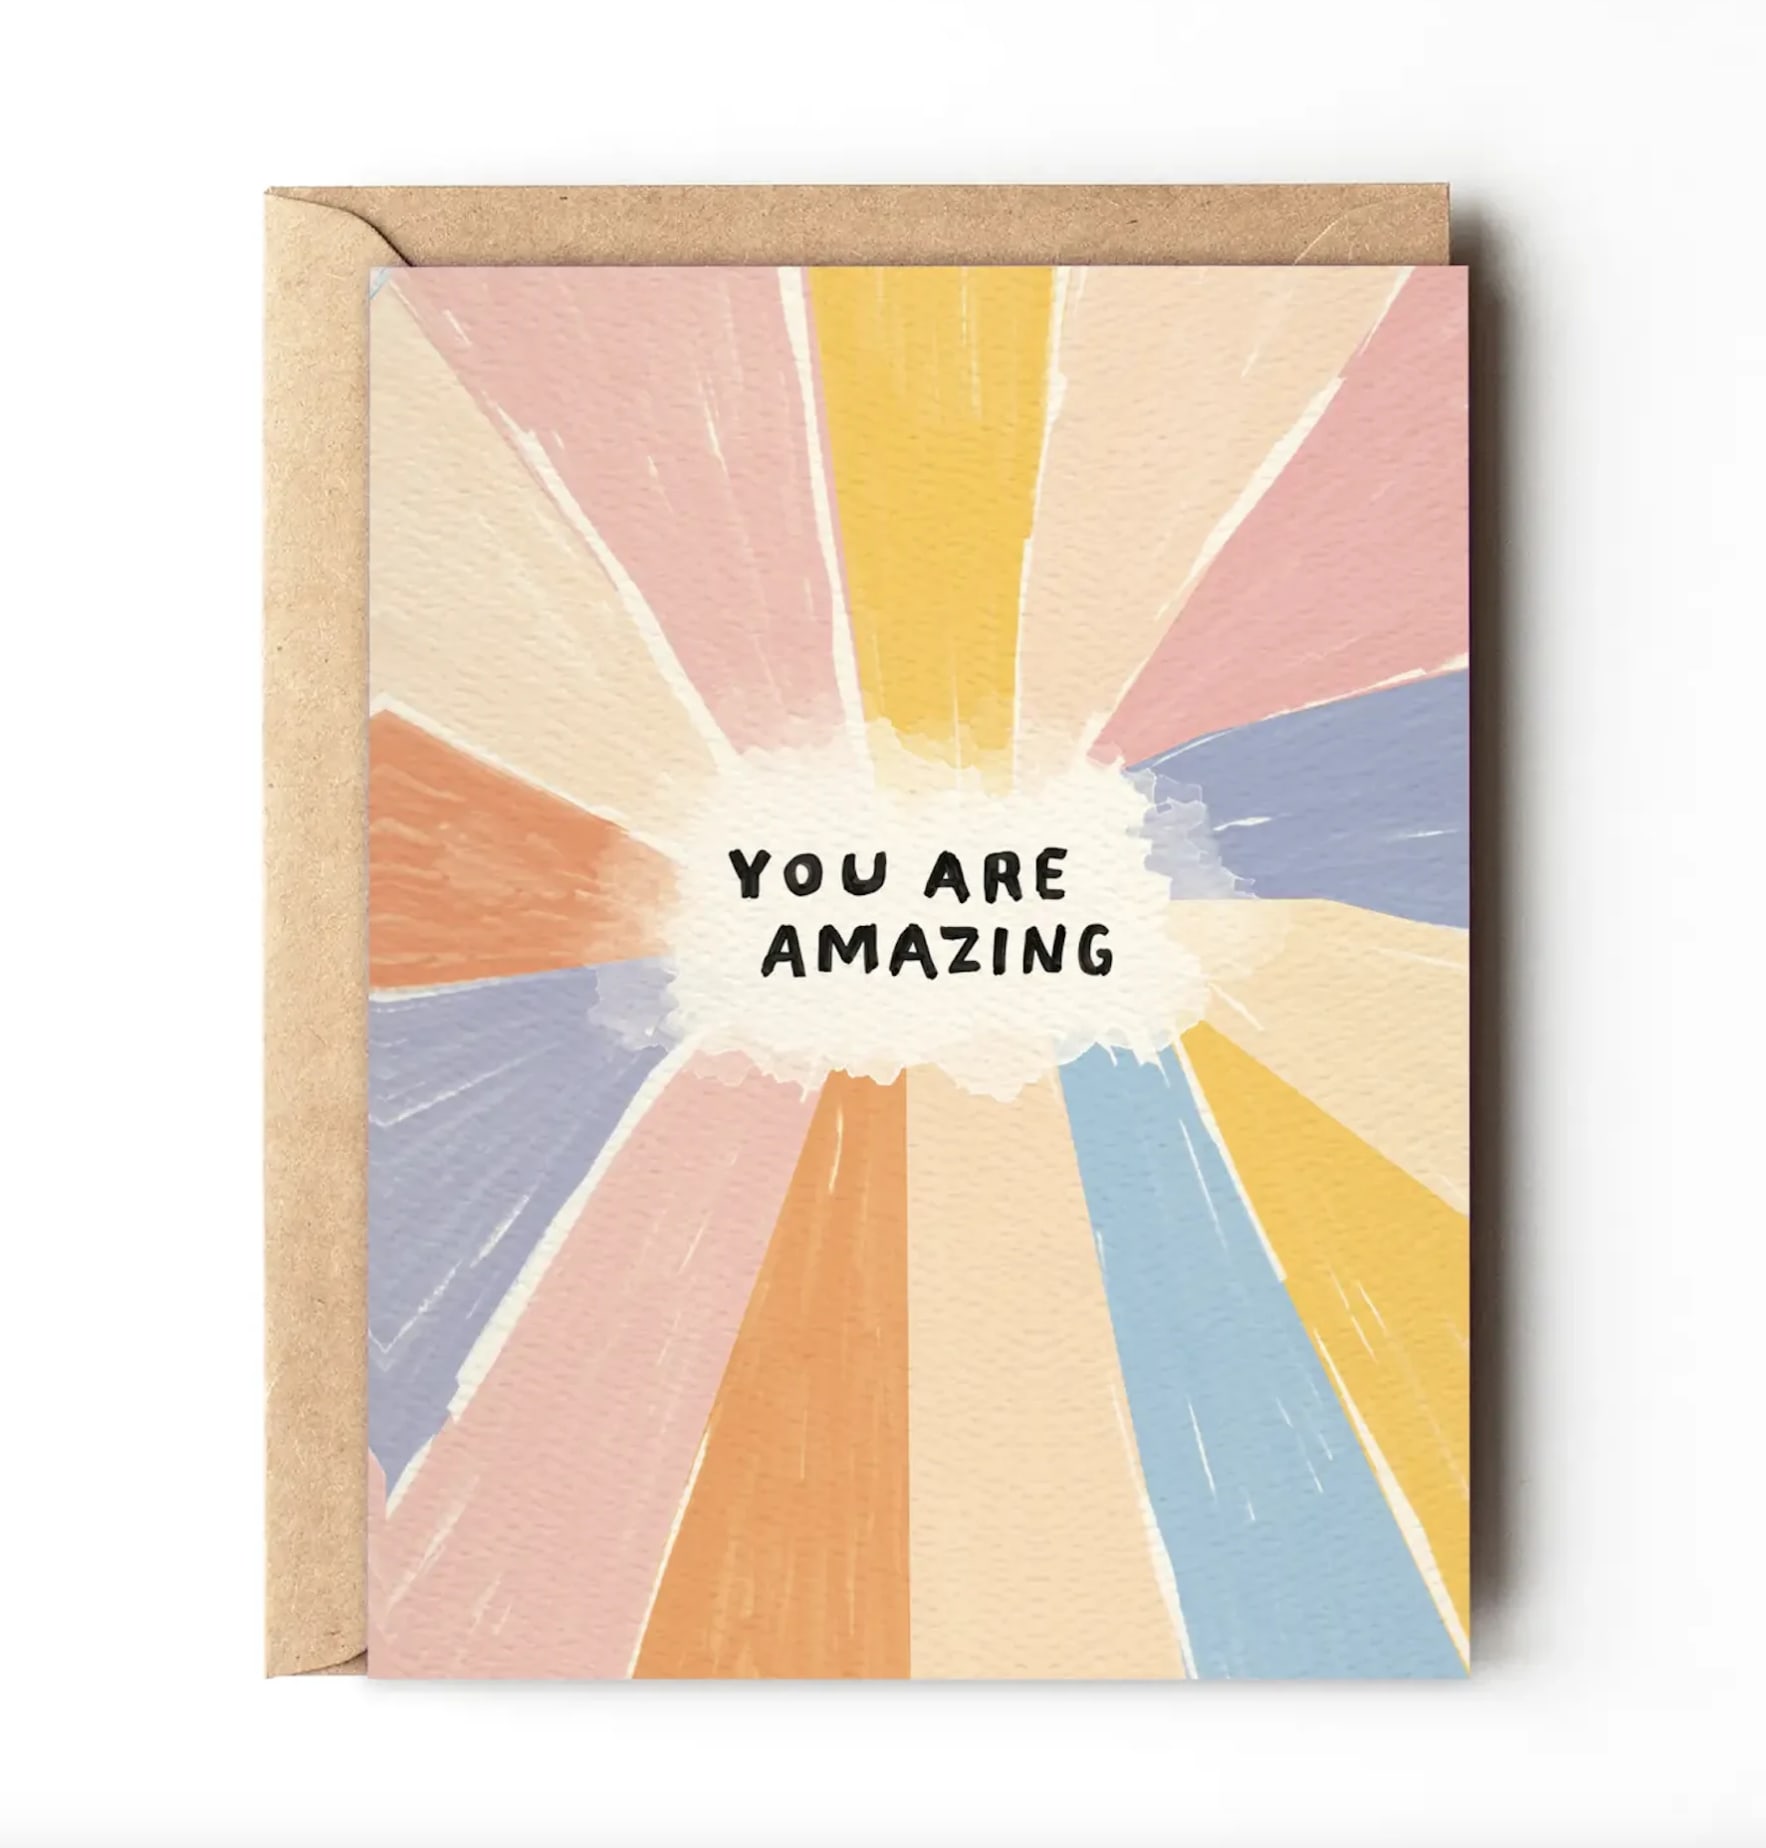 You Are Amazing - Colorful Rainbow Greeting Card - You are amazing. Everyone deserves this card! An uplifting, happy card that works for any occasion - birthday, anniversary, just because, thank you.  Need a handwritten card? Let us write it for you! Please specify your card message in the &quot;Florist Instructions&quot; field.  A2 size card &amp; envelope (4.25 x 5.5&quot;) Folded card, blank interior Printed full color on cream 100lb cardstock  Designed &amp; printed in the USA